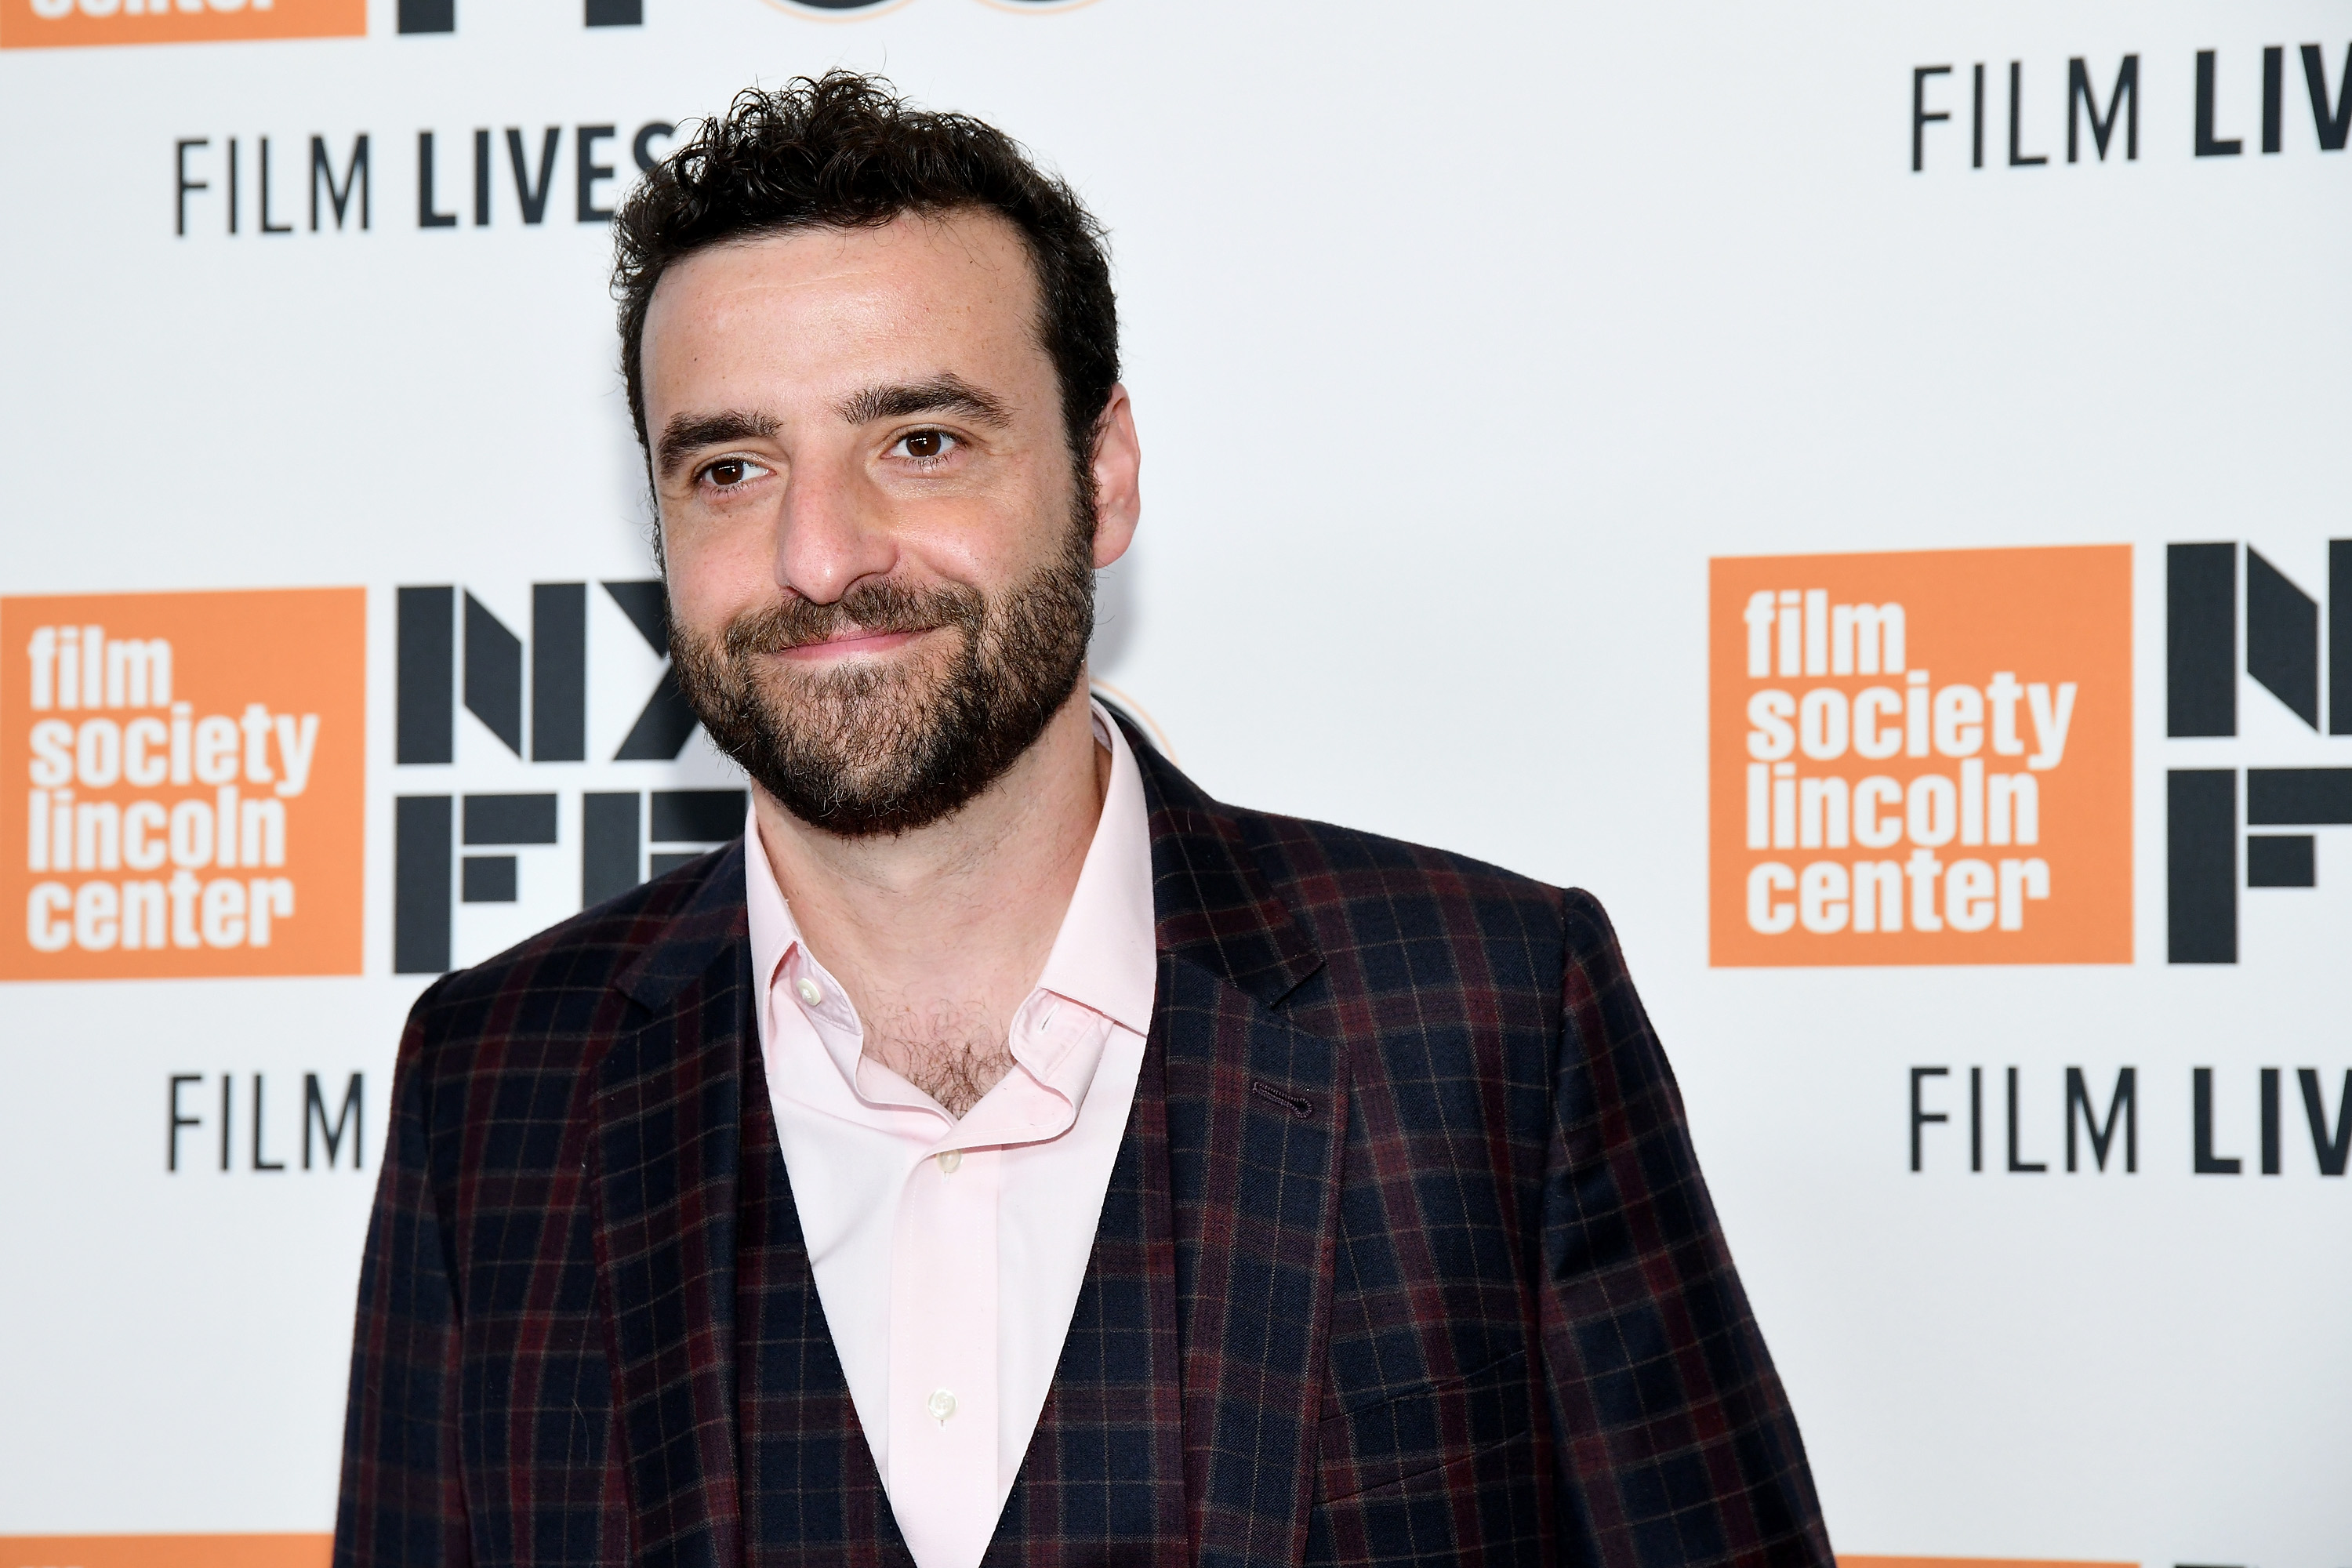 David Krumholtz: 9 interesting facts you did not know about the actor